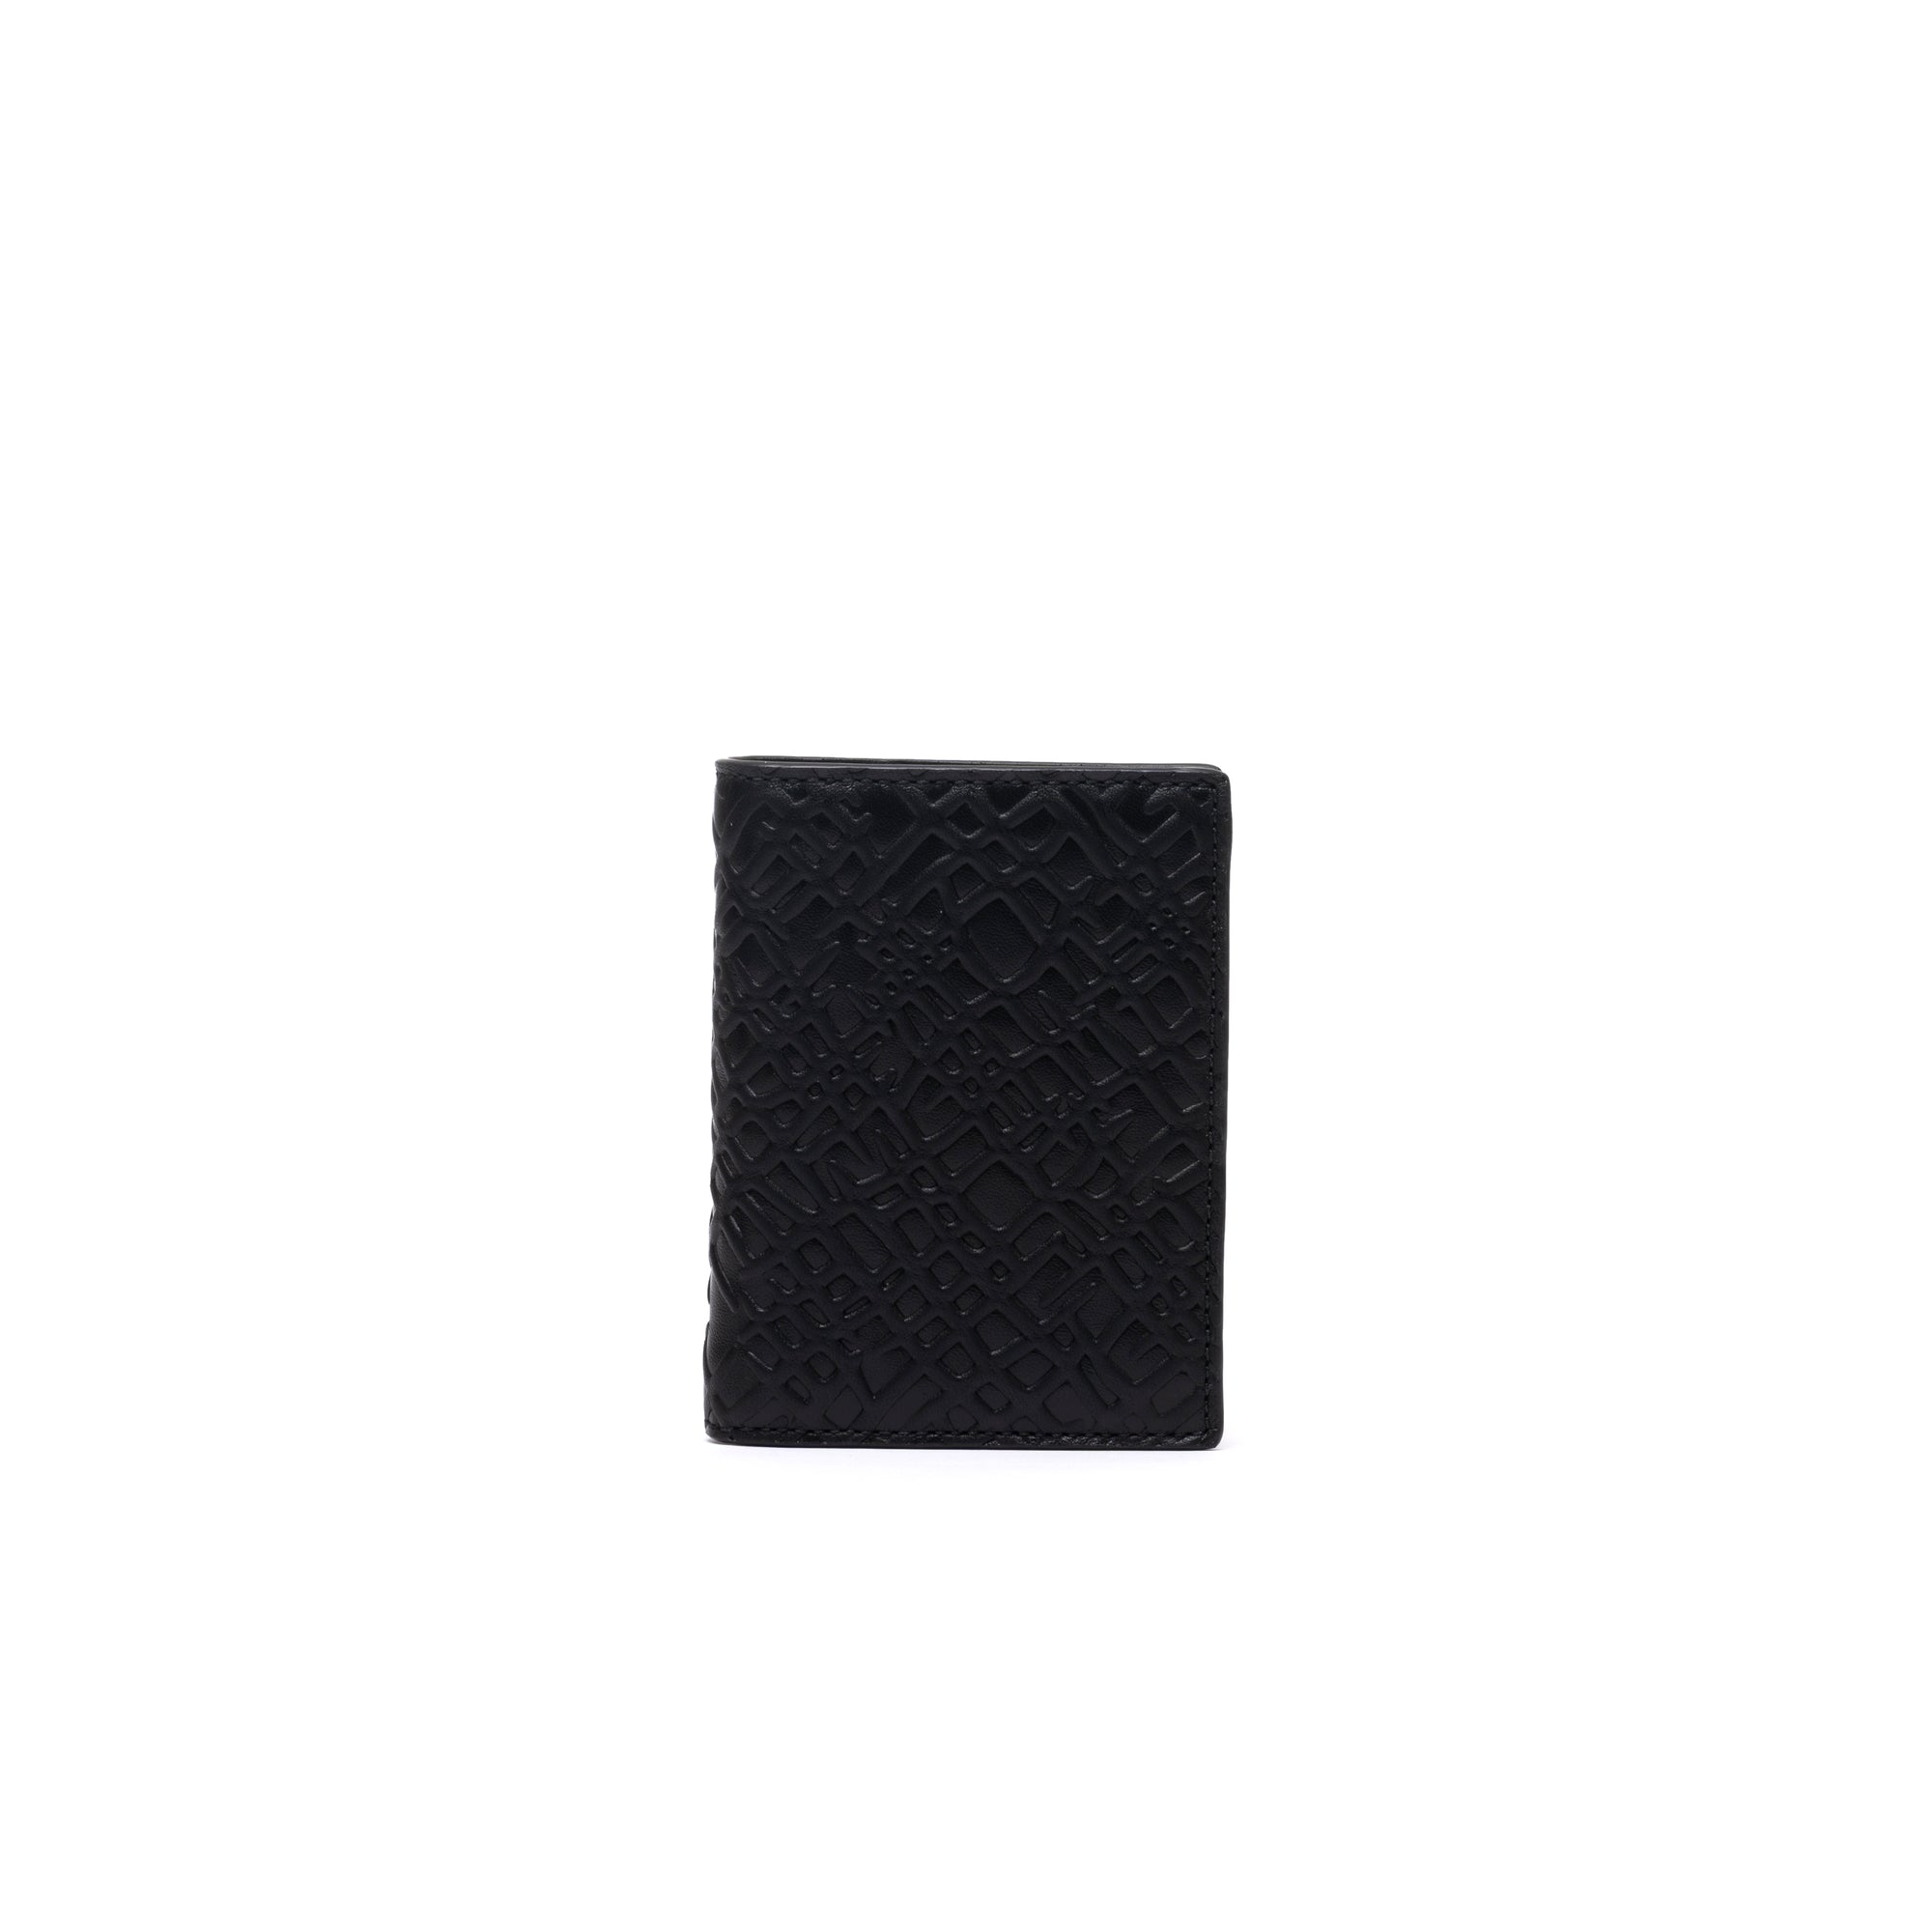 CDG WALLET - Embossed Roots (SA0641ER Black) view 1